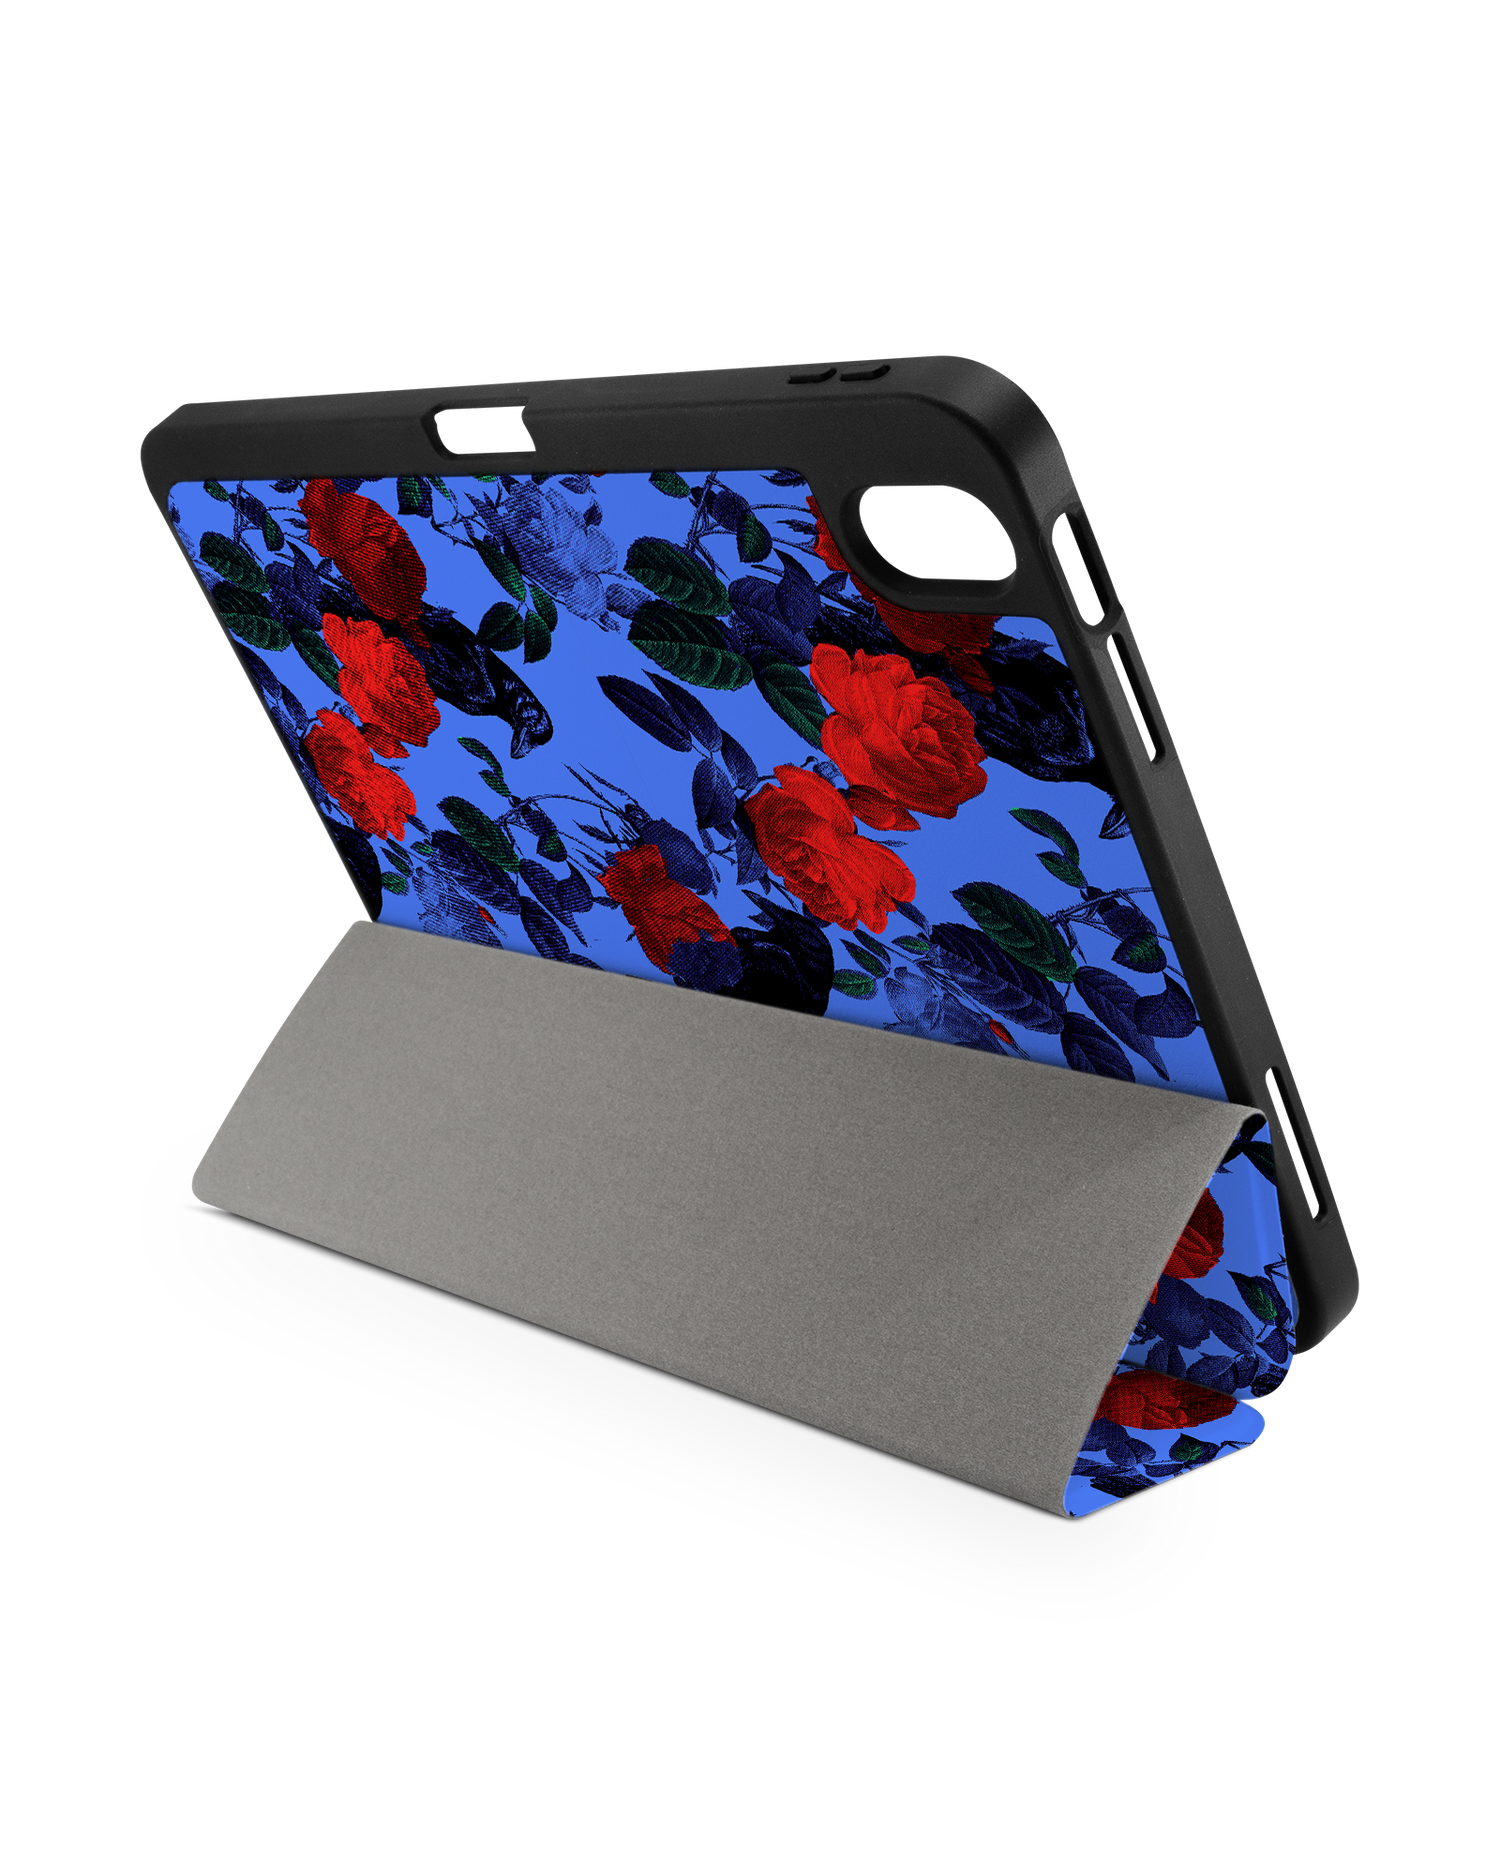 Roses And Ravens iPad Case with Pencil Holder for Apple iPad (10th Generation): Set up in landscape format (back view)